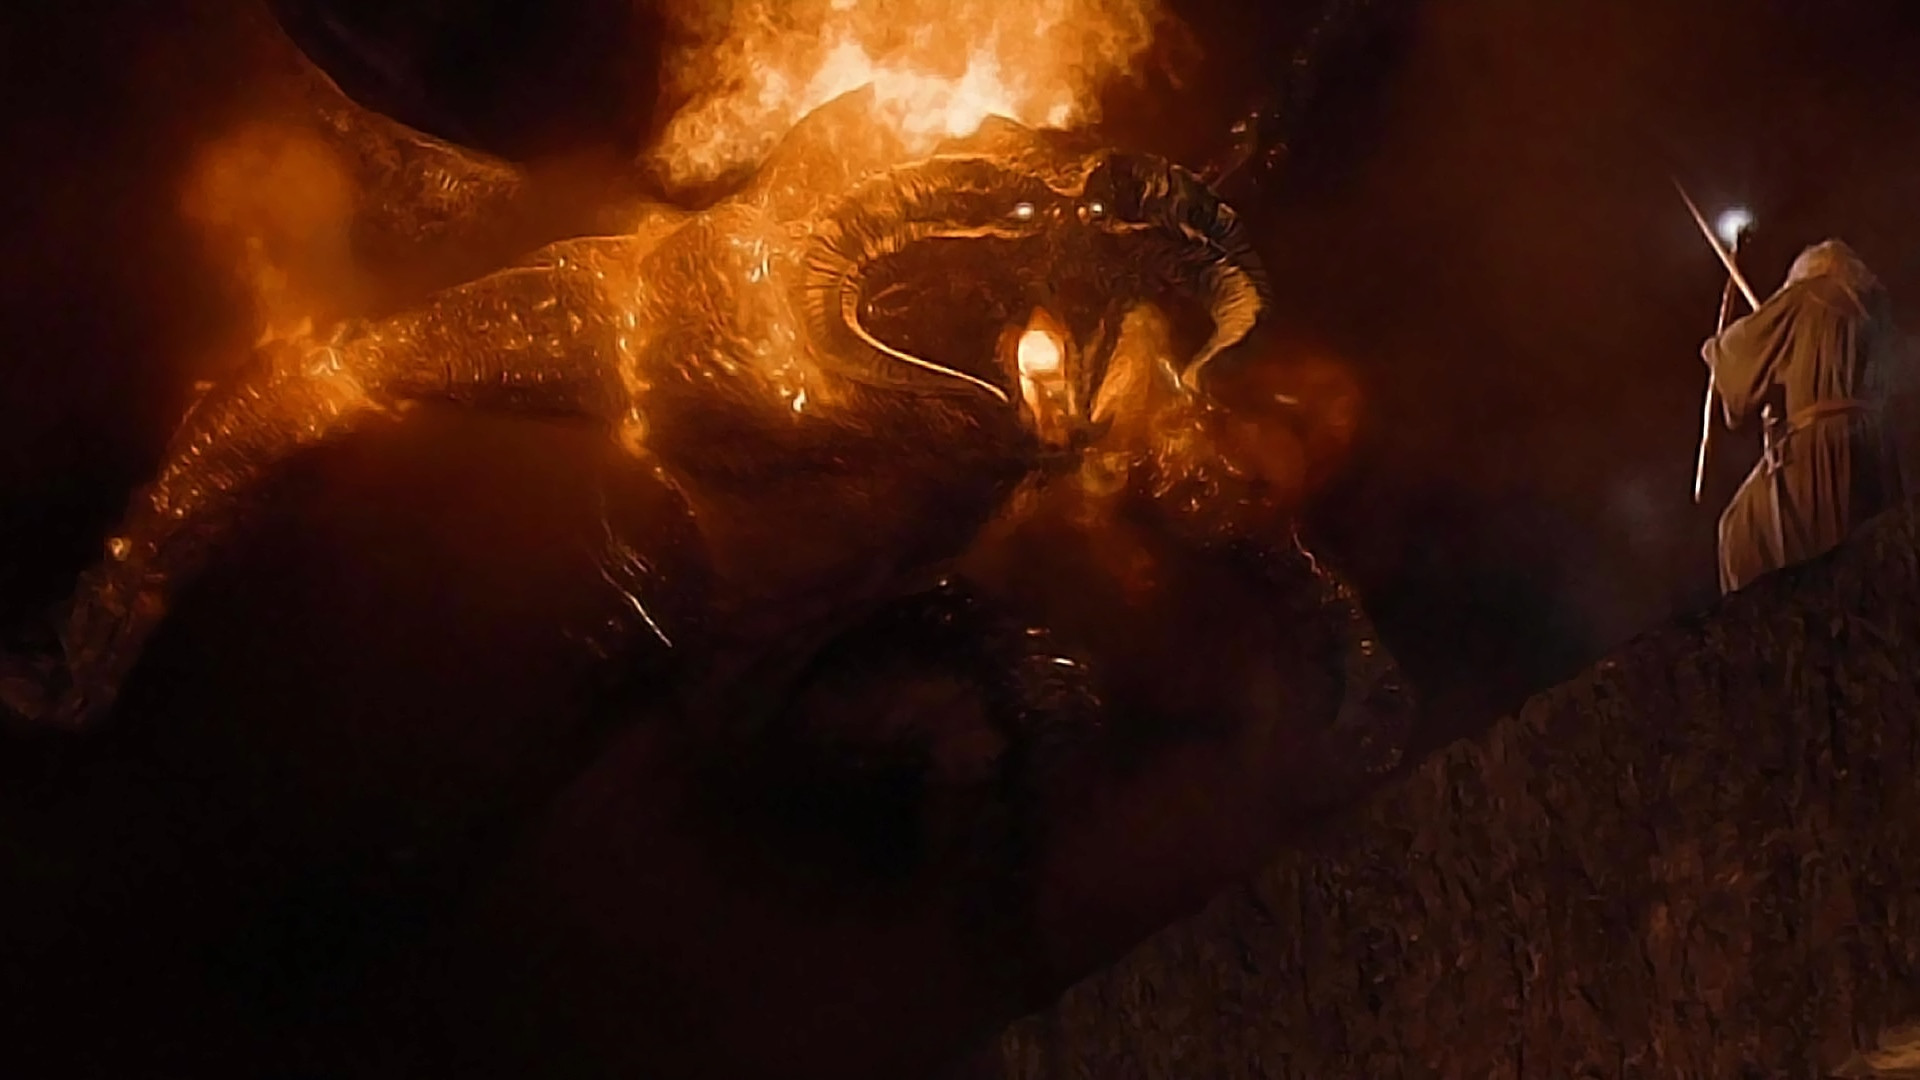 1920x1080 Lord Of The Rings Wallpaper Balrog 6 the balrog 